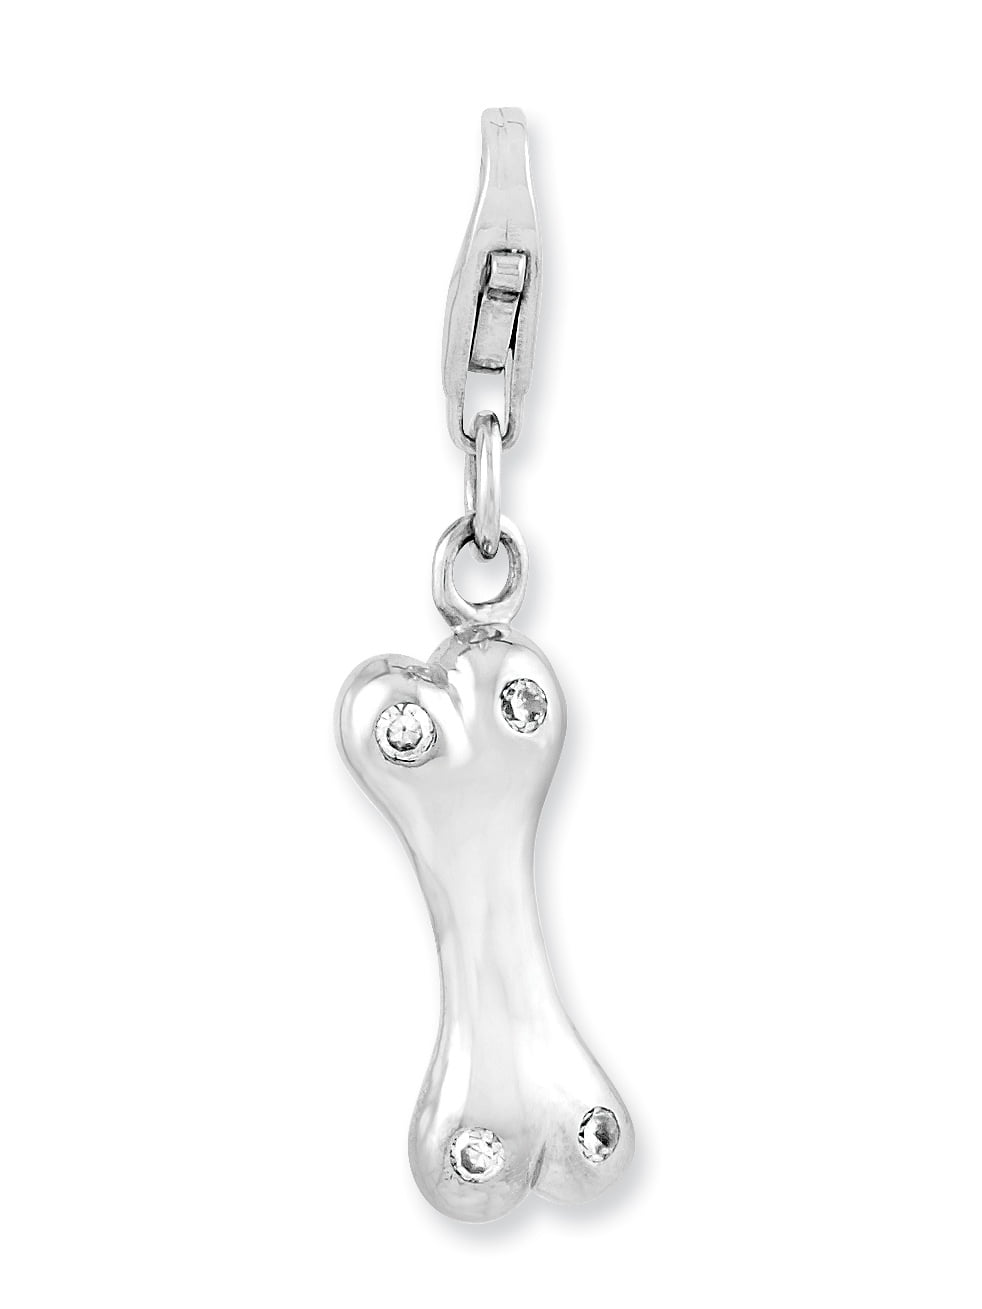 Details about   Polished Rhodium Plated 925 Sterling Silver 3D Lobster Charm Pendant